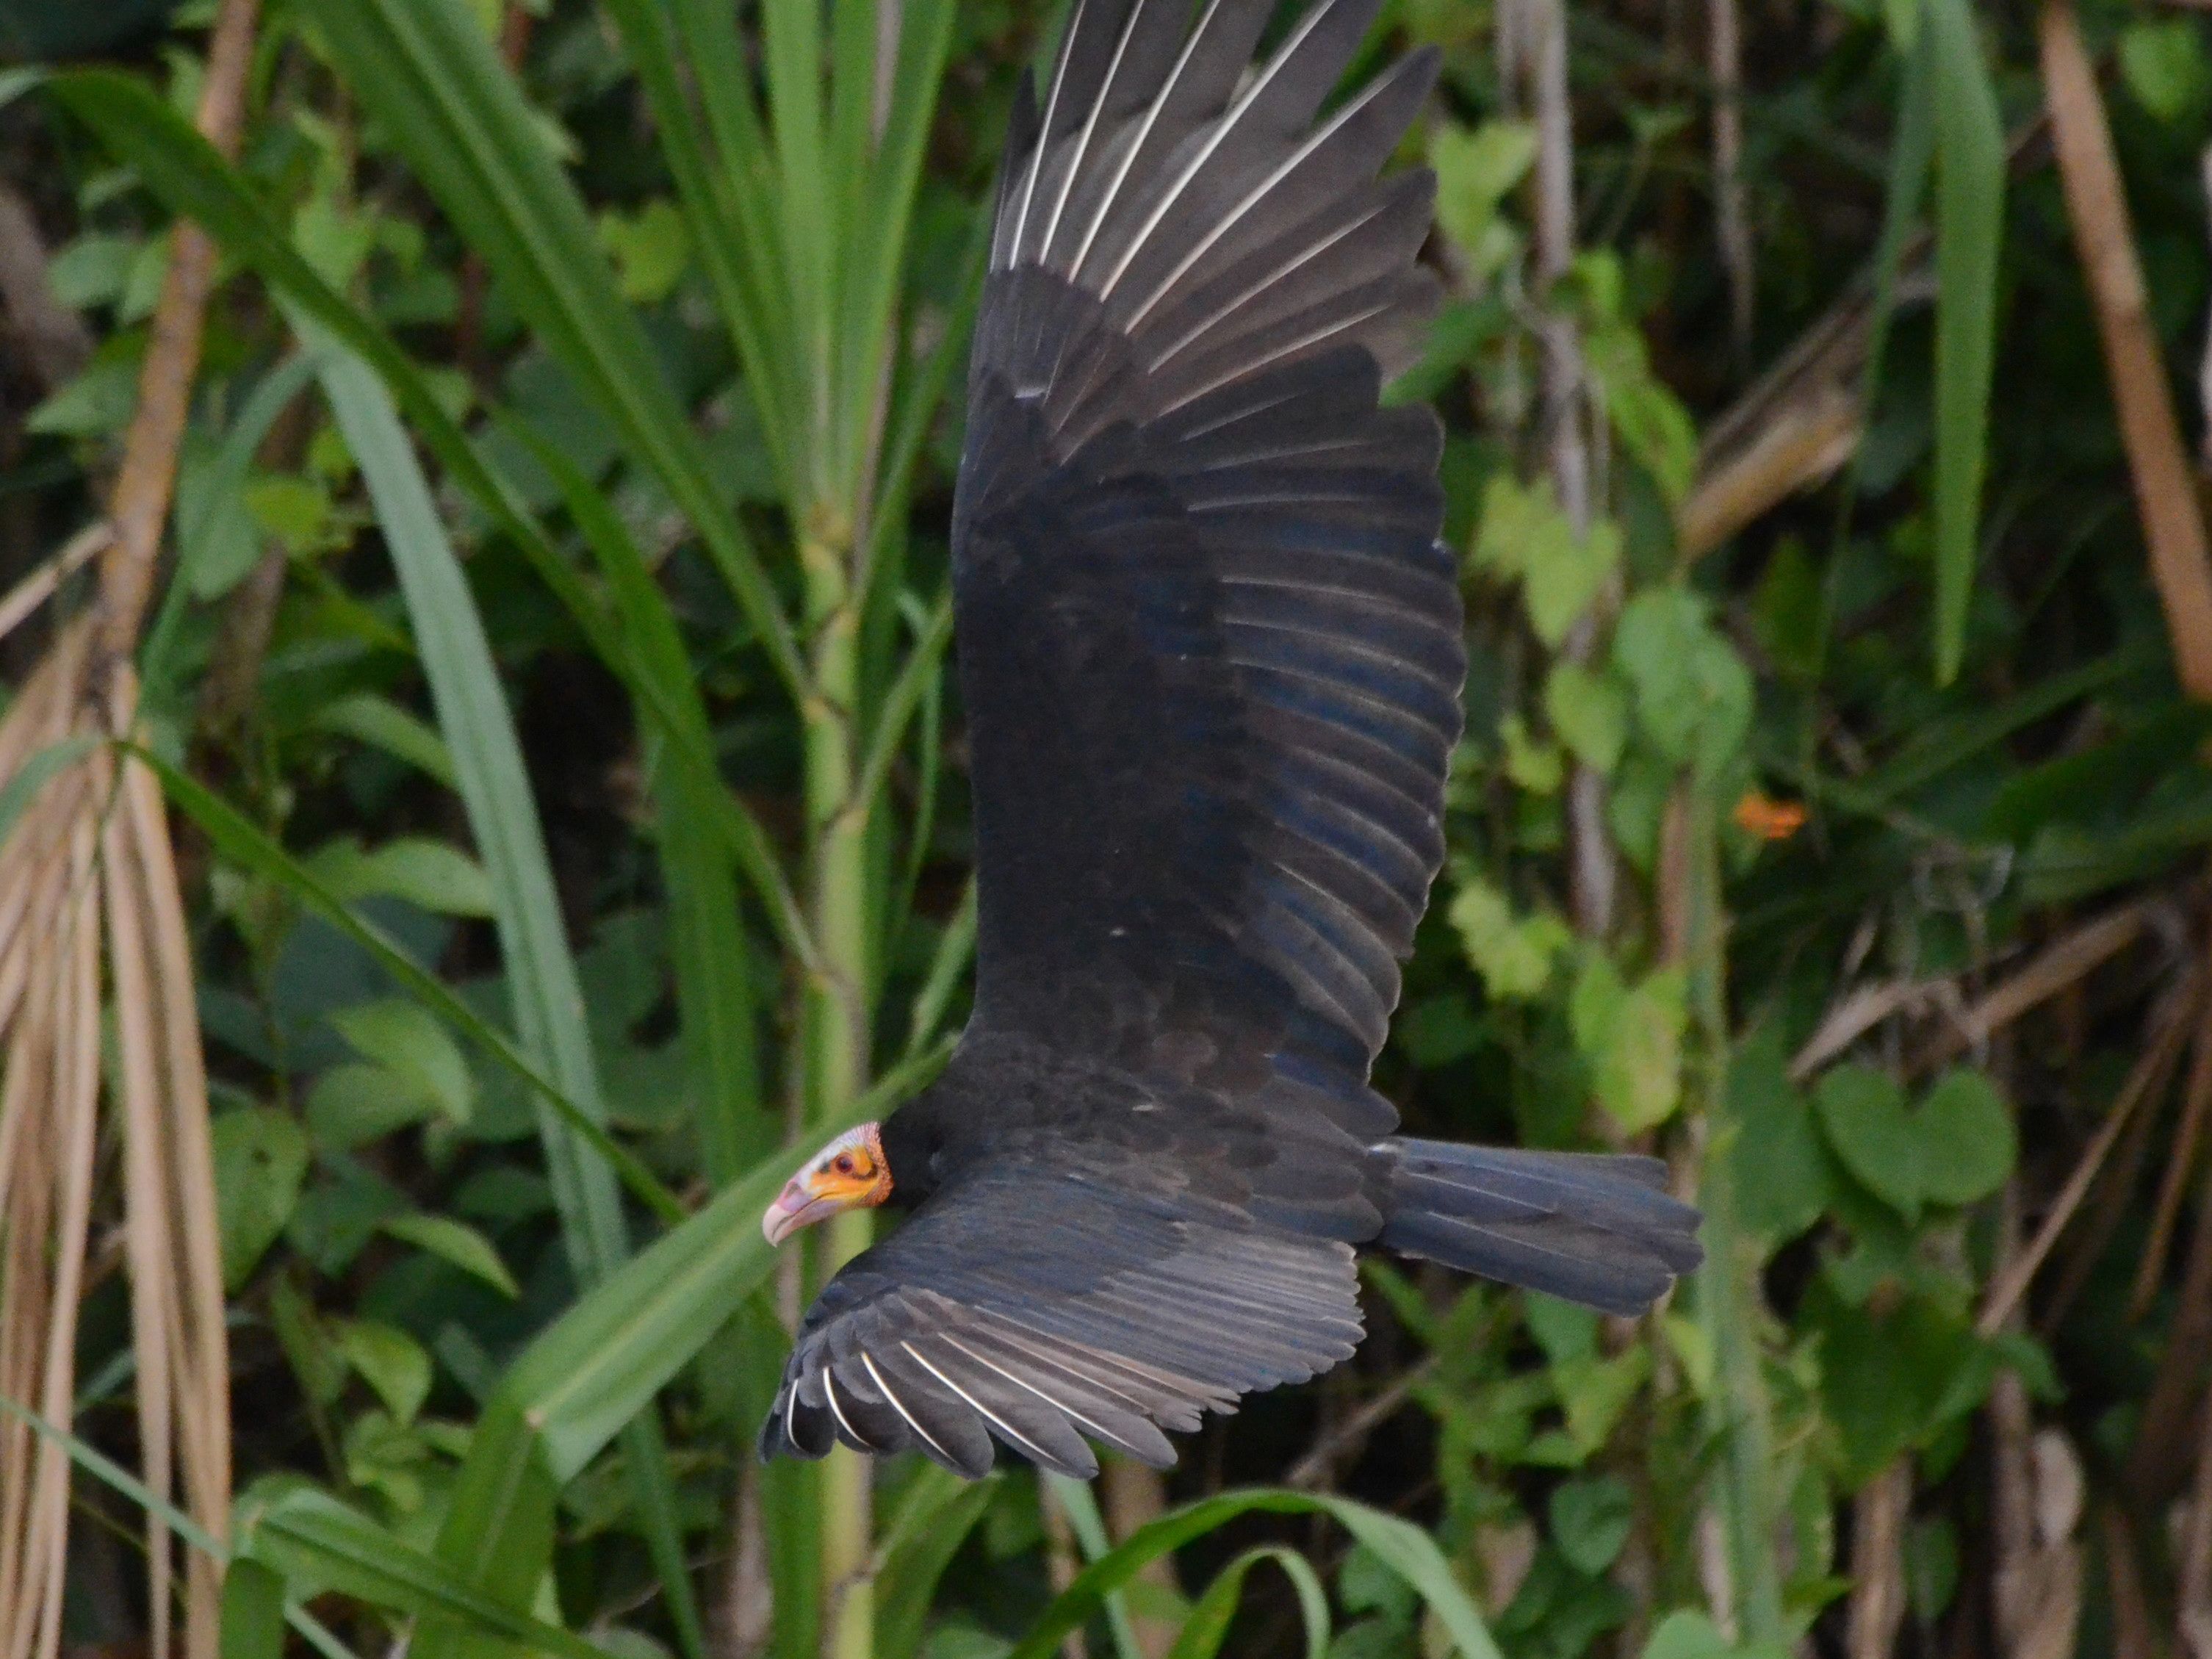 Click picture to see more Lesser Yellow-headed Vultures.